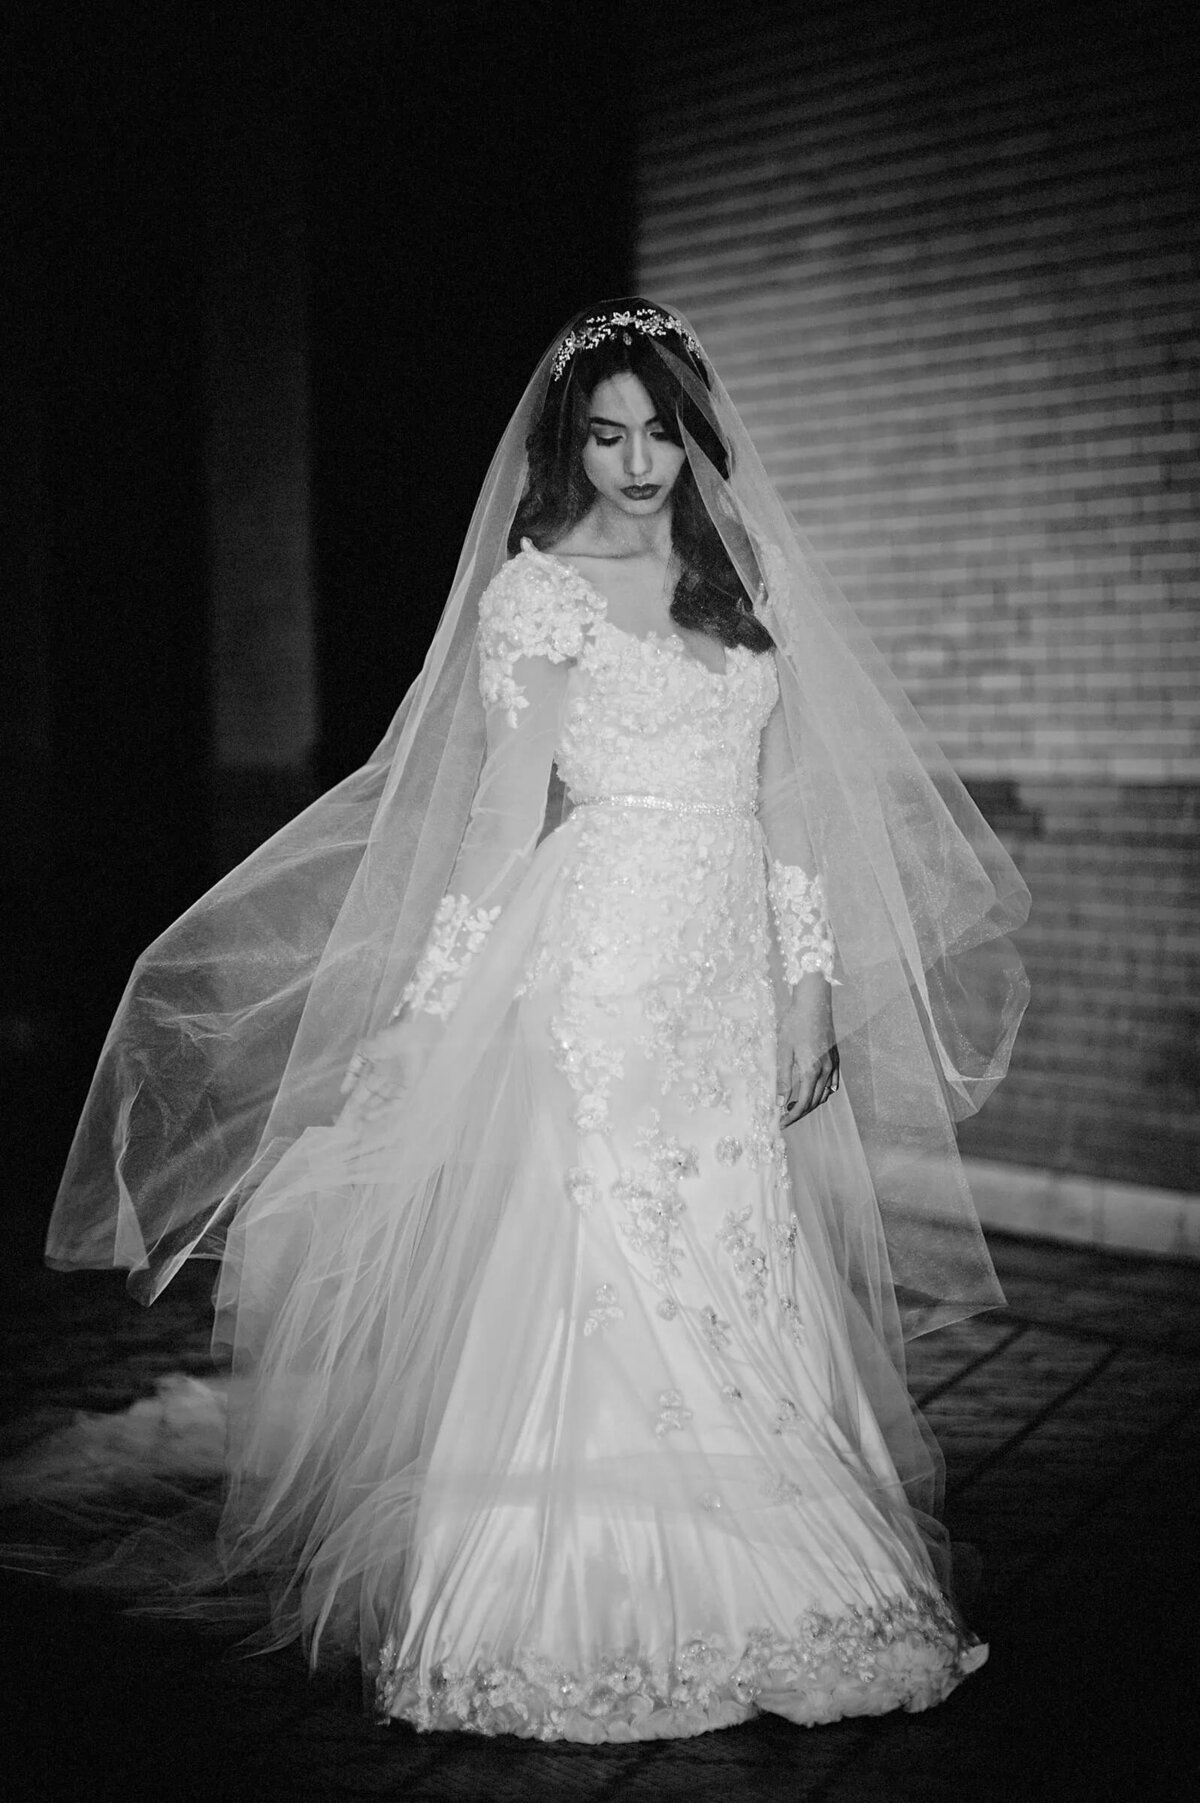 A black and white portrait of a bride in her wedding dress and veil